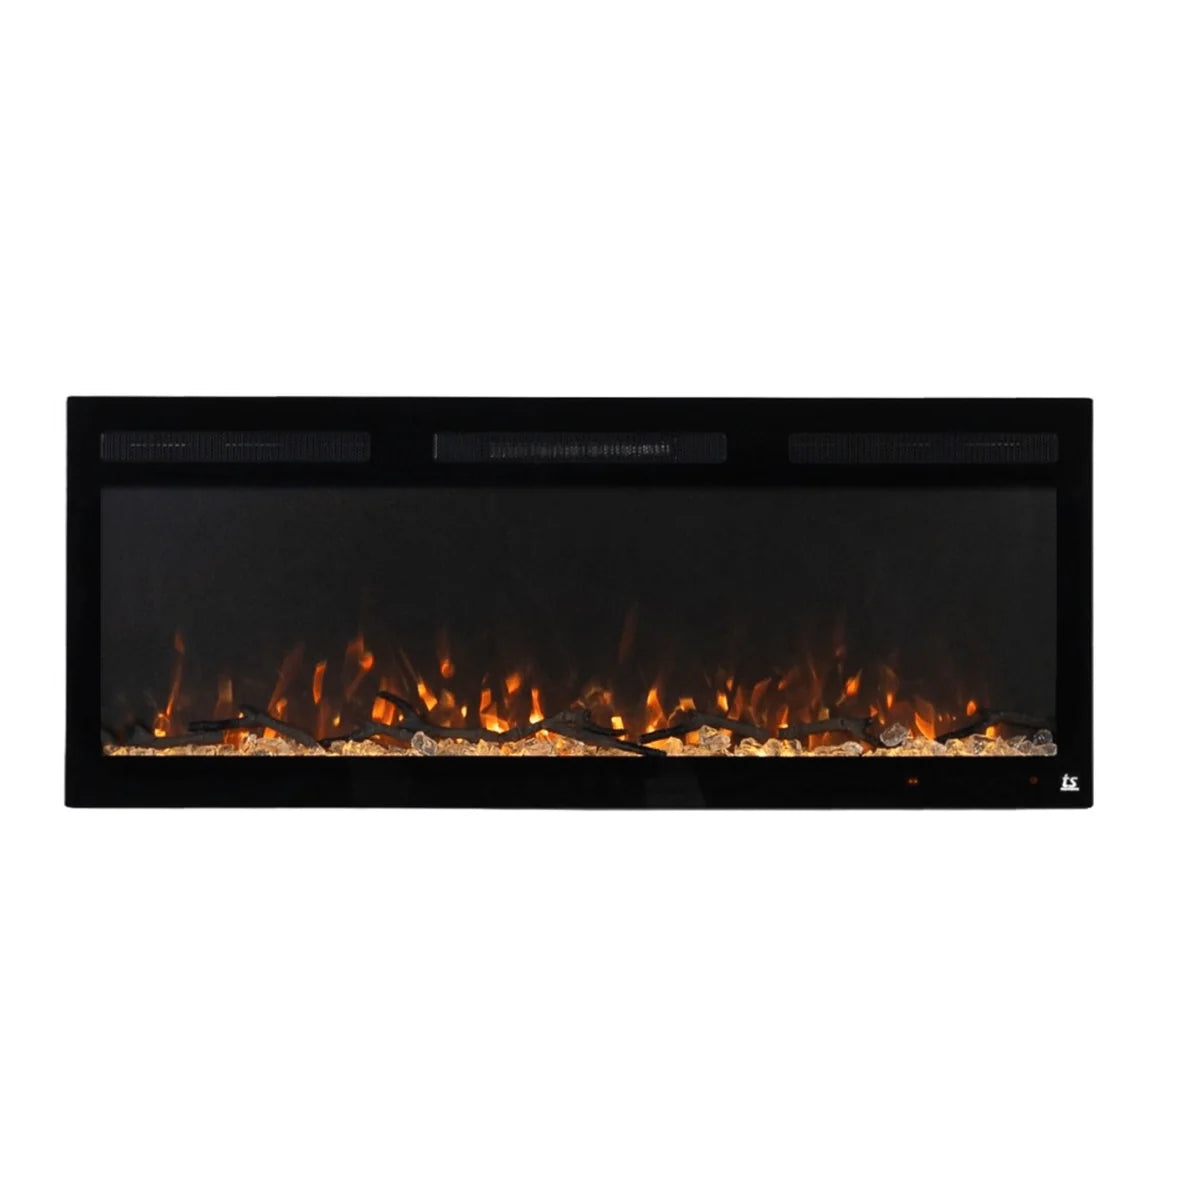 The Sideline Fury 46 Inch Recessed Smart Electric Fireplace 80053